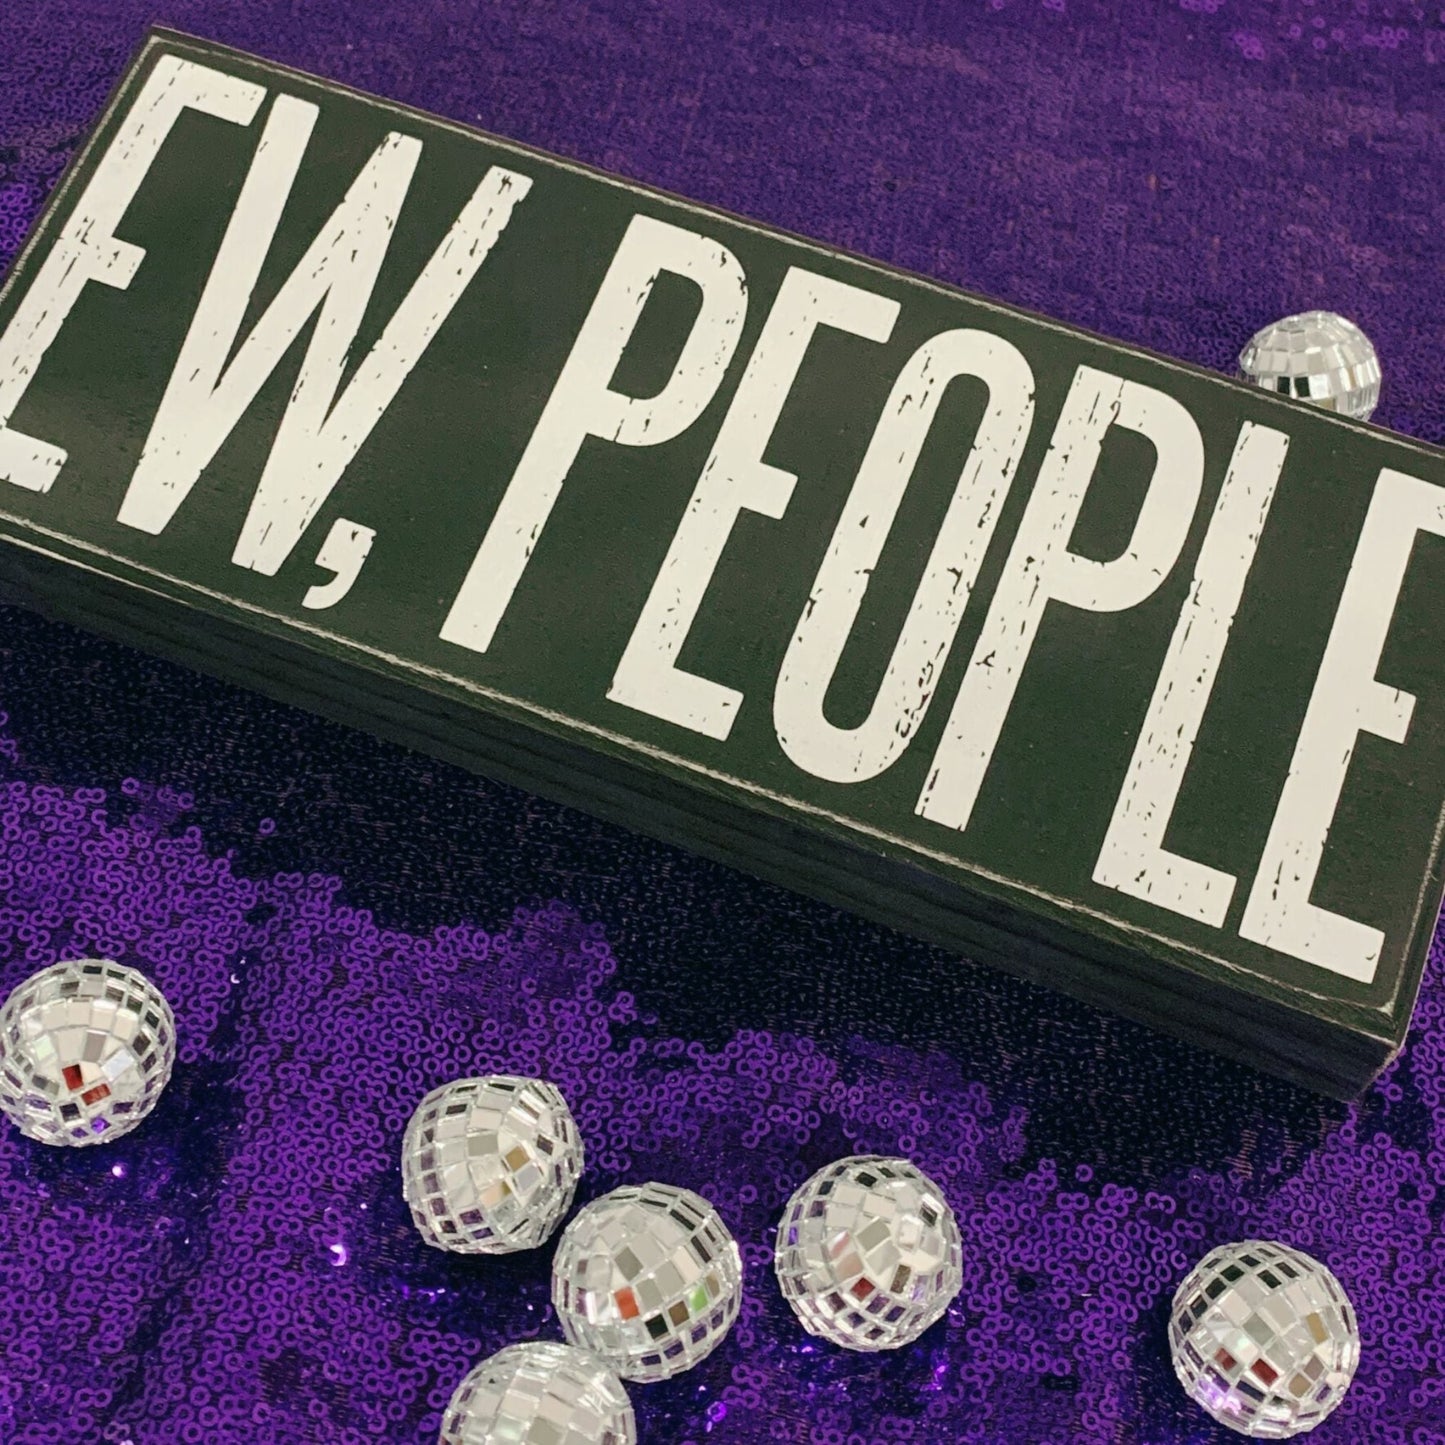 Ew, People Wooden Box Sign | Black with White Lettering 10.5" Long